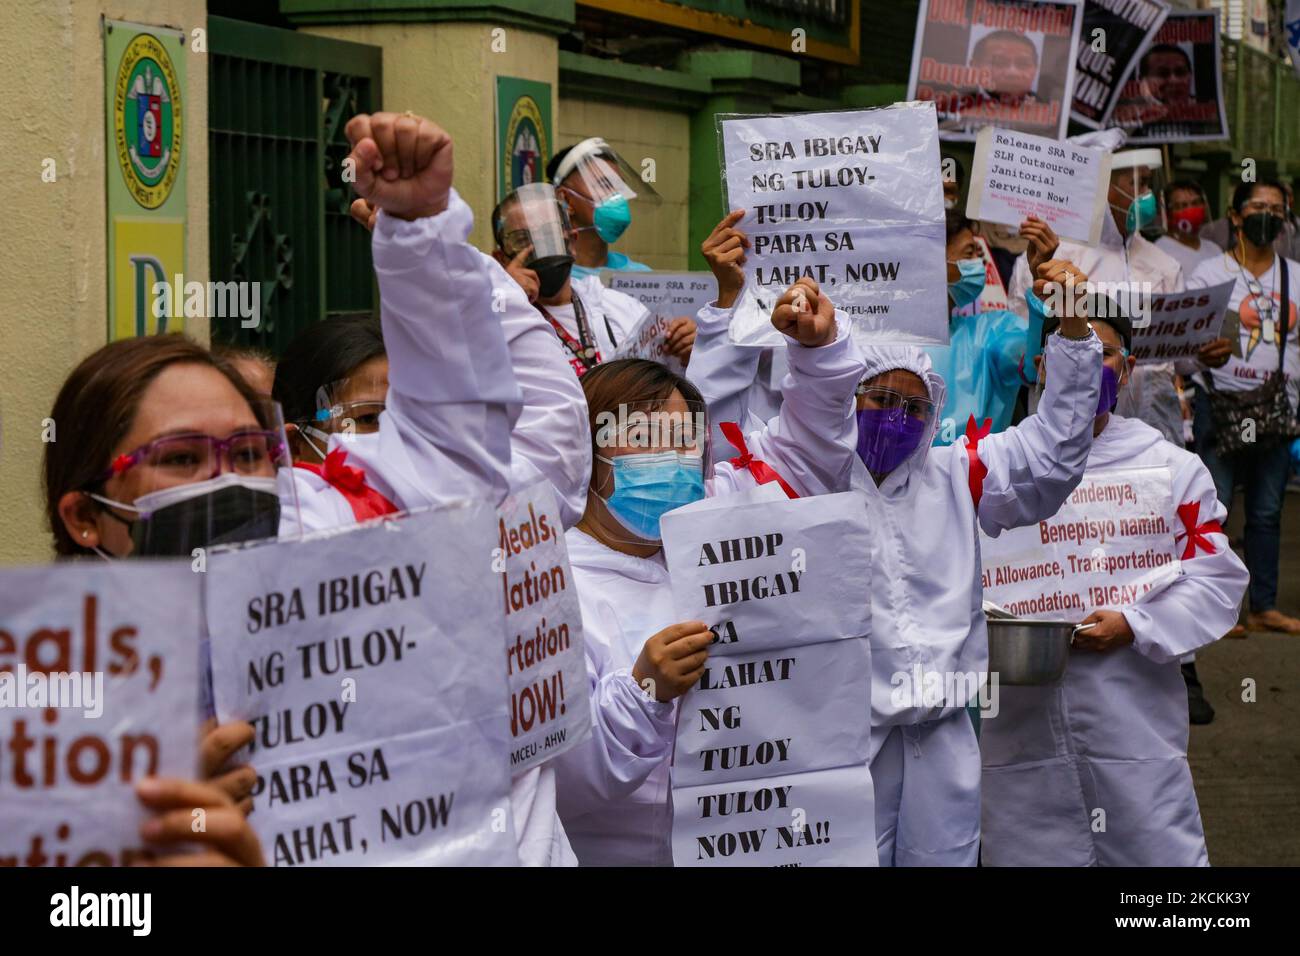 Health workers stage protests outside the Department of Health (DOH) headquarters in Manila, Philippines on September 1, 2021. Several workers from different hospitals trooped to the gates of the facility to condemn health secretary Francisco Duque III and called for his resignation for the department’s alleged misuse of COVID19 funds during the pandemic. (Photo by George Calvelo/NurPhoto) Stock Photo